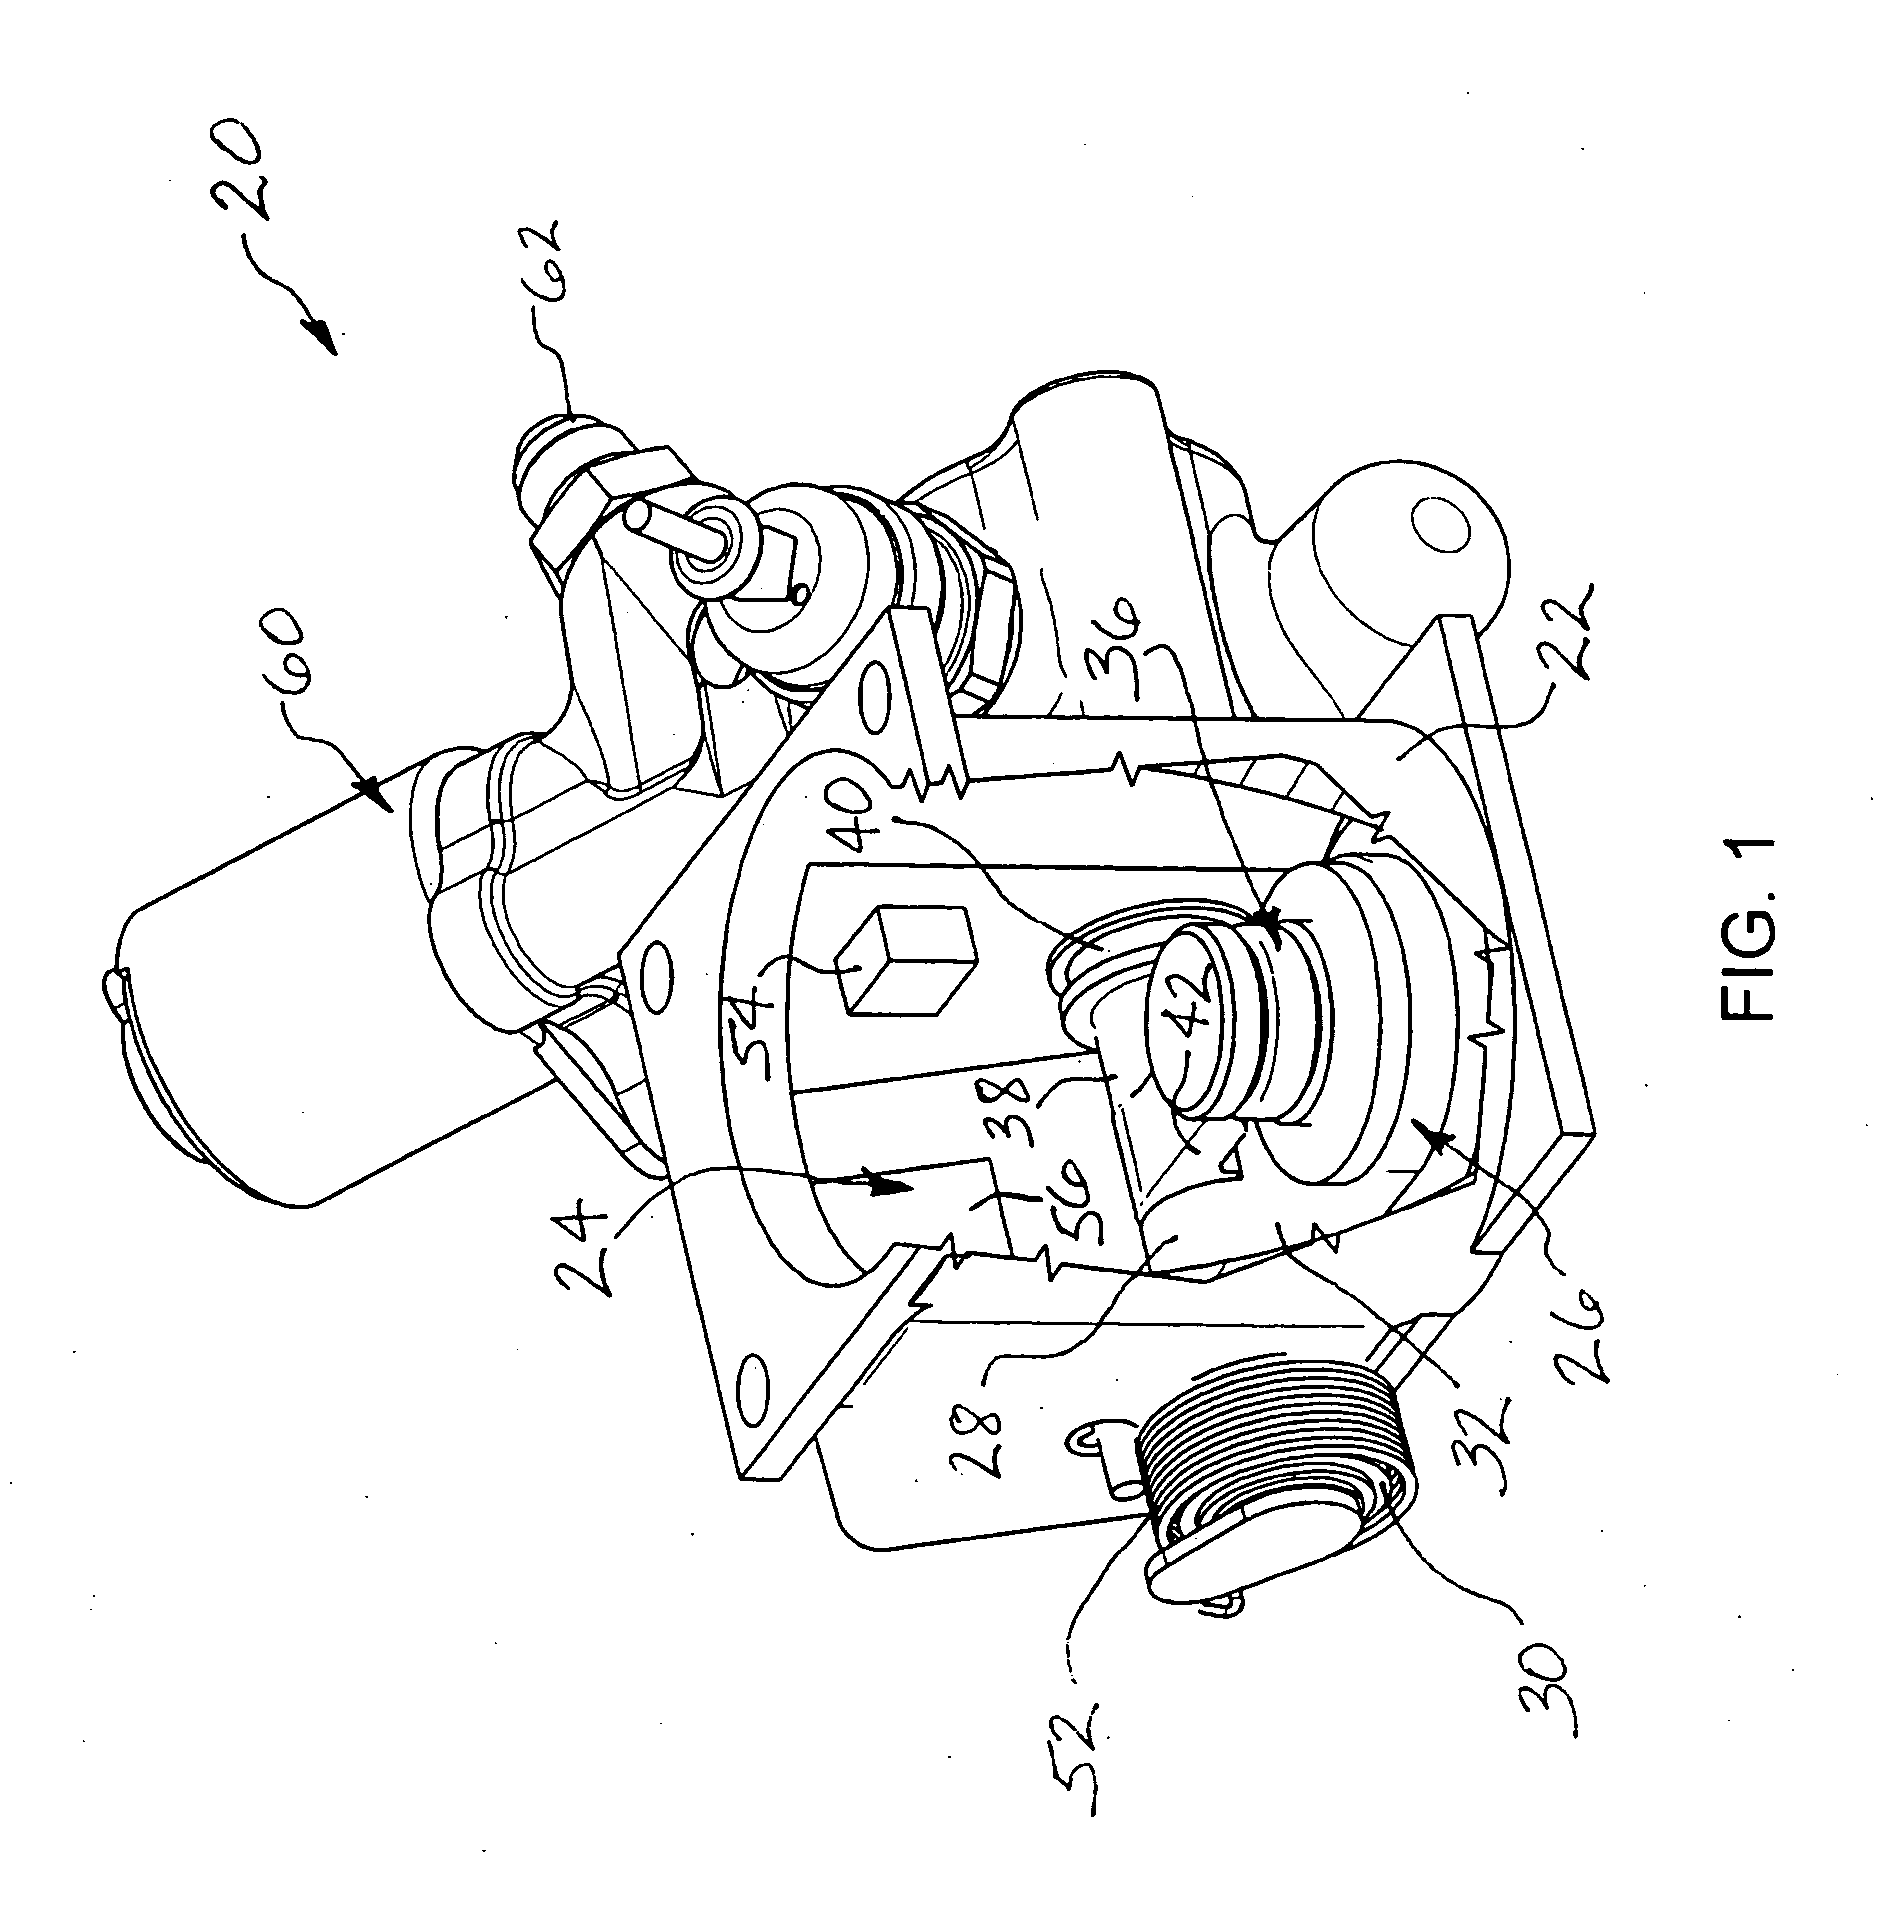 Swing valve for a turbocharger with stacked valve members, and two-stage turbocharger system incorporating same